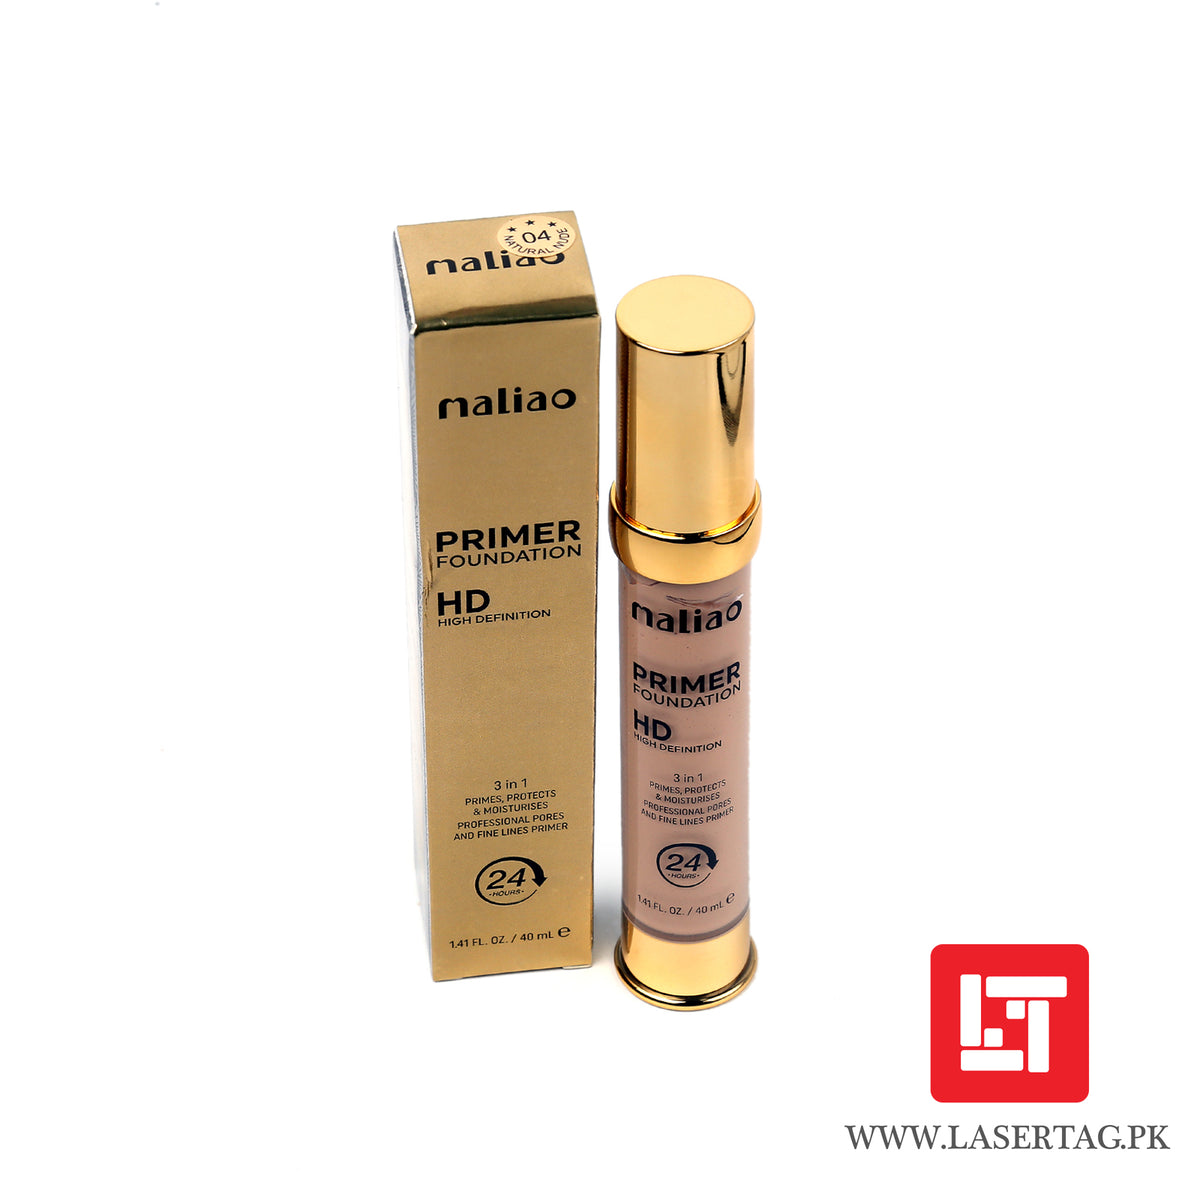 Maliao Primer Foundation HD High Definition 3 In 1 PRimes, Protects &amp; Moisturises Natural Nude M175-04 40ml freeshipping - lasertag.pk